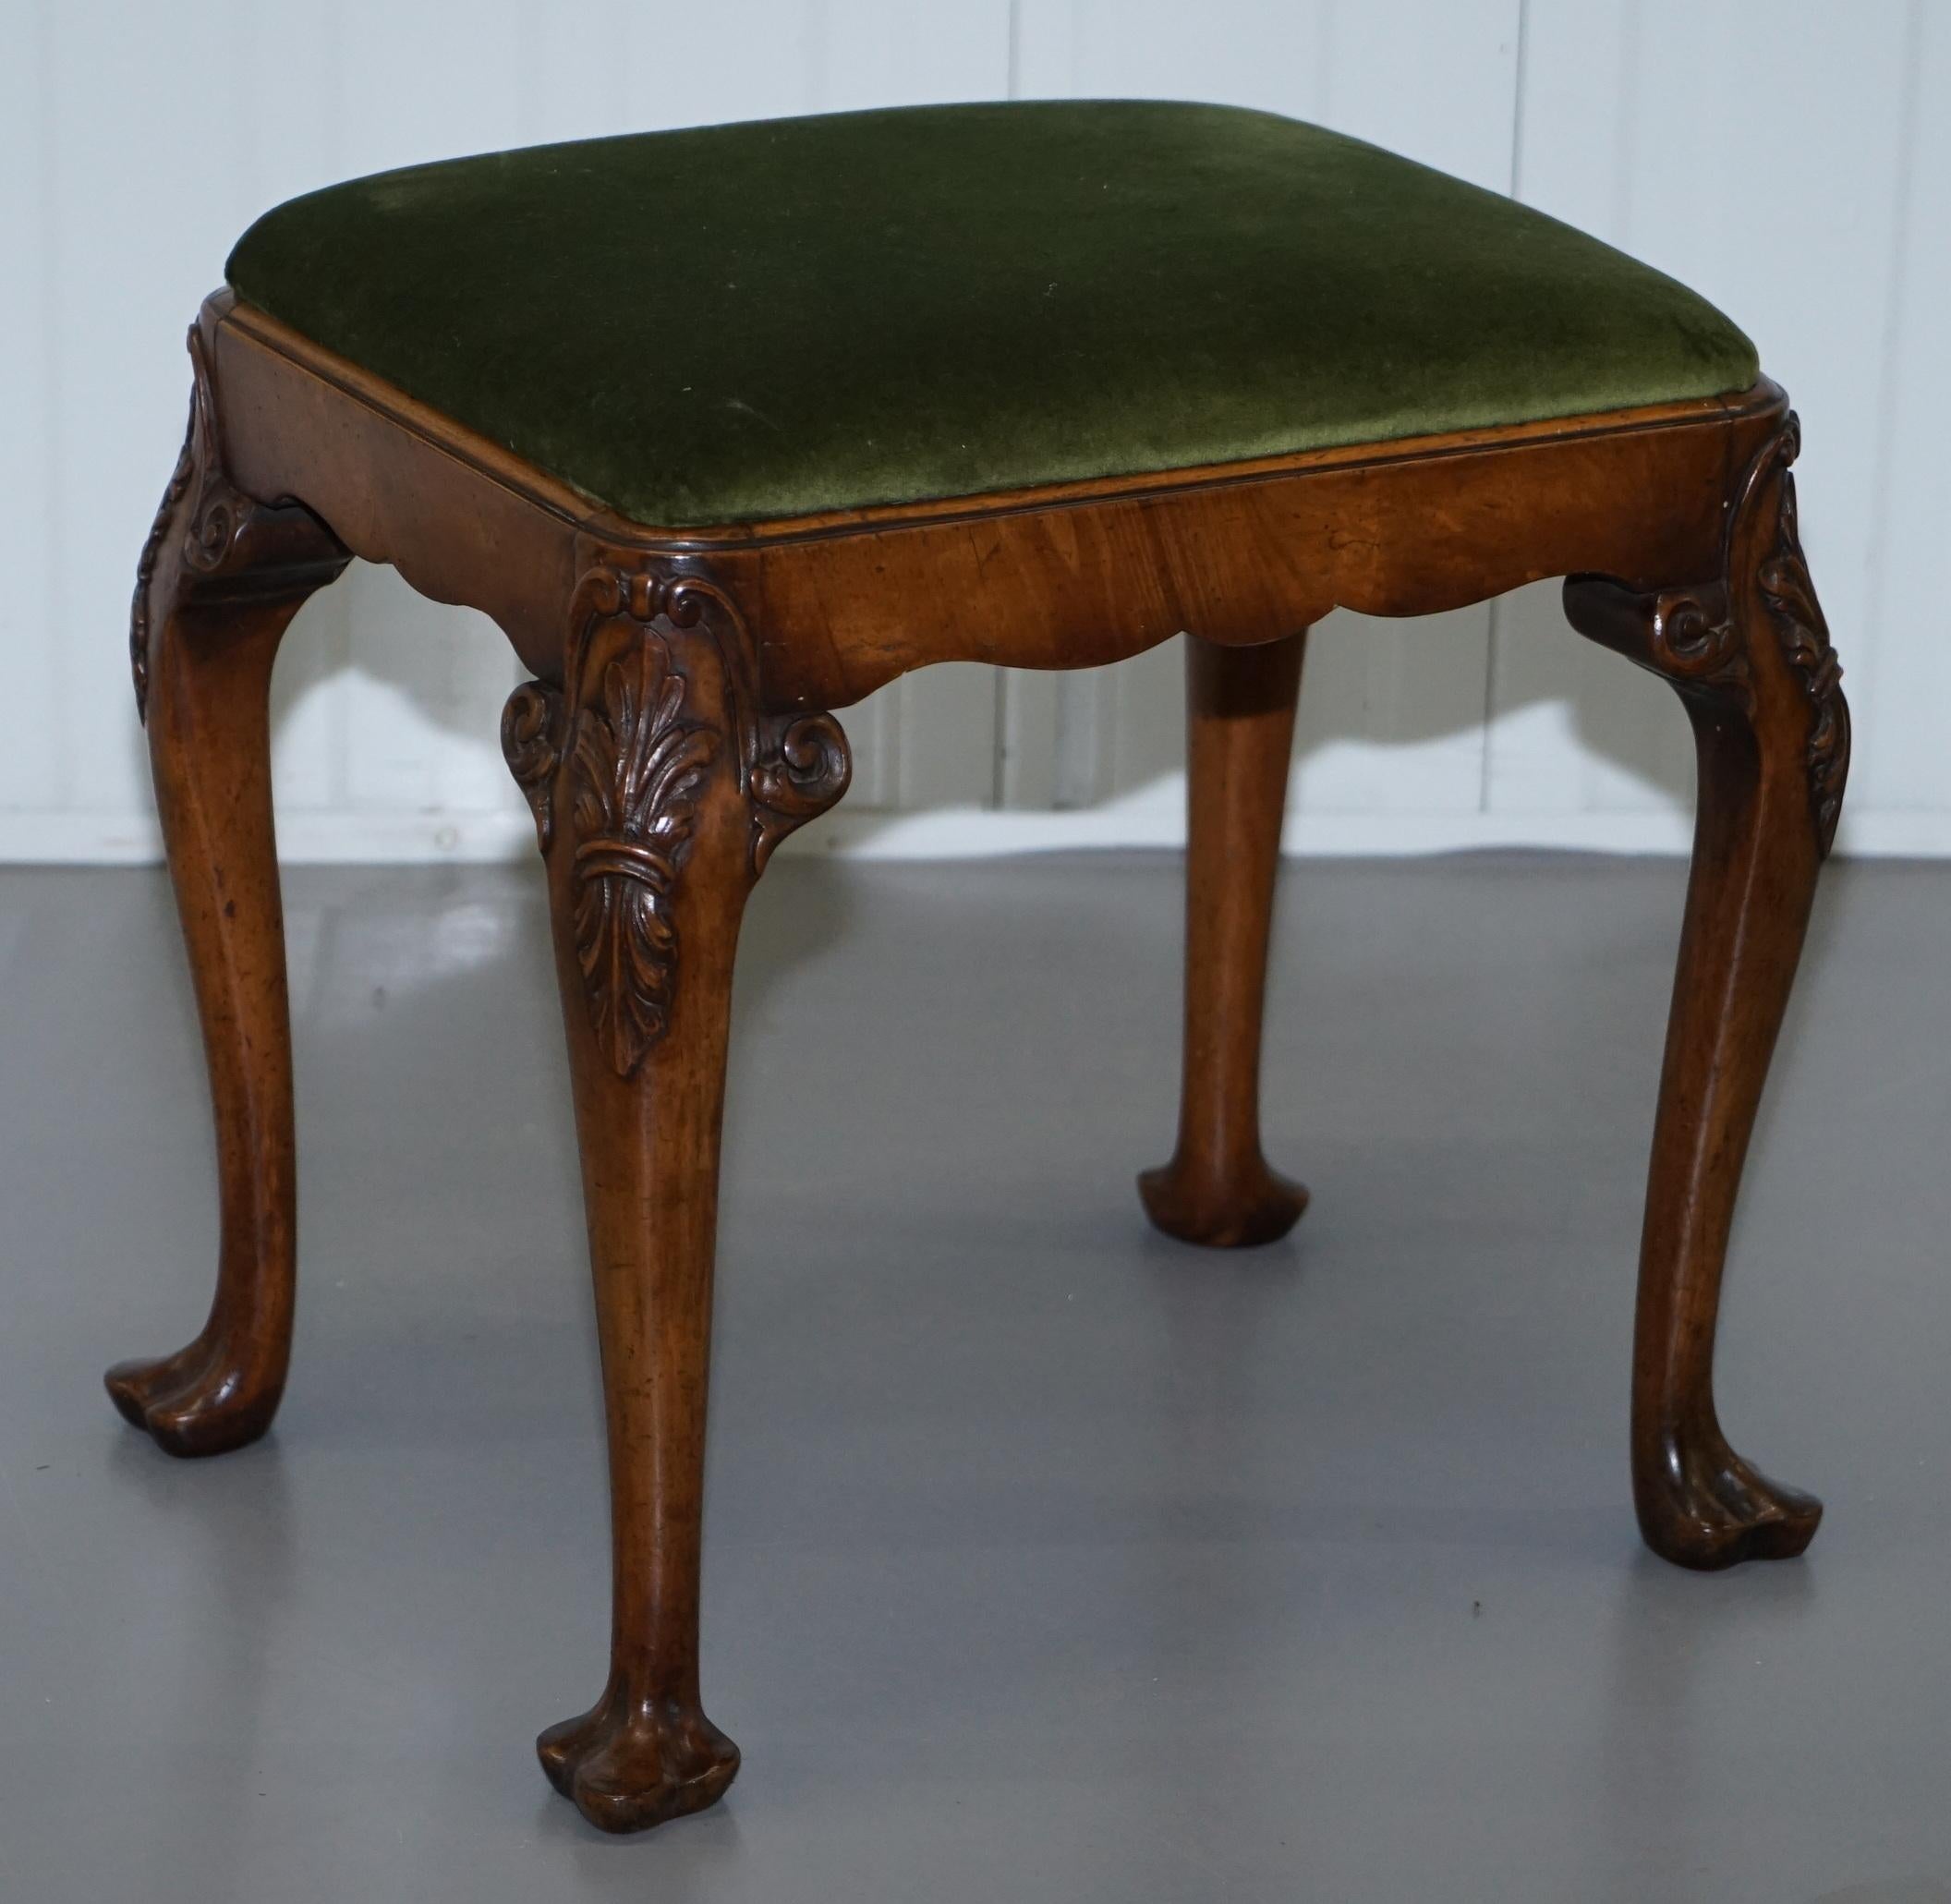 We are delighted to this lovely hand carved Victorian stool with ornate cabriolet legs 

A very good looking well-made and decorative piece, this is like art furniture to me, you can place it in any setting and it really pops.

We have cleaned